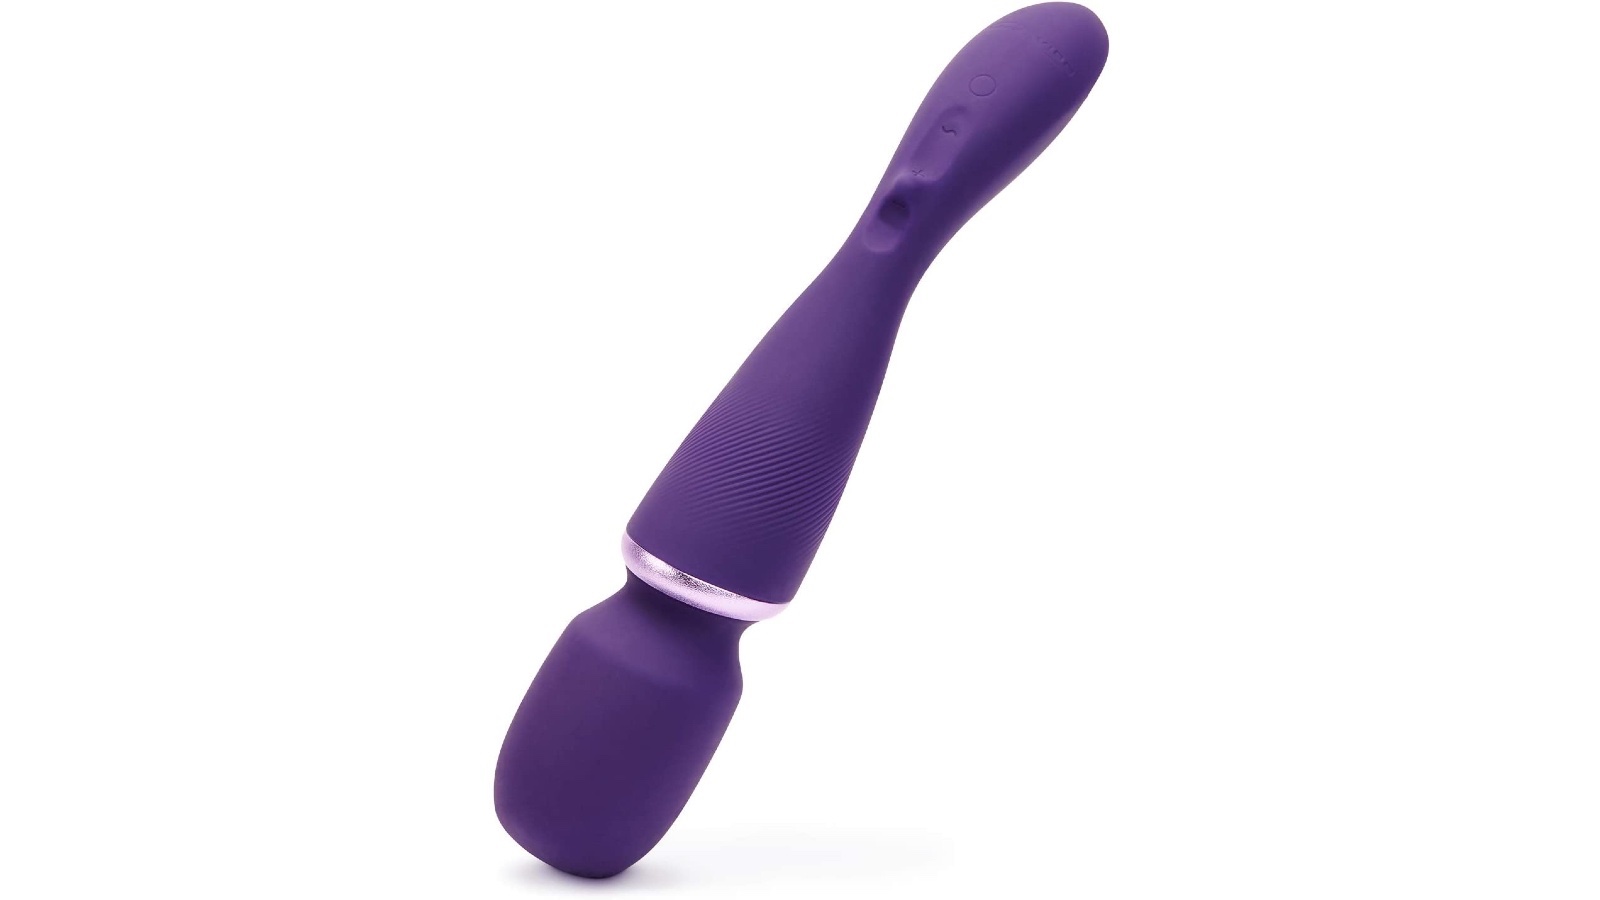 We-Vibe Wand Review - Is this the Best Wand Vibrator